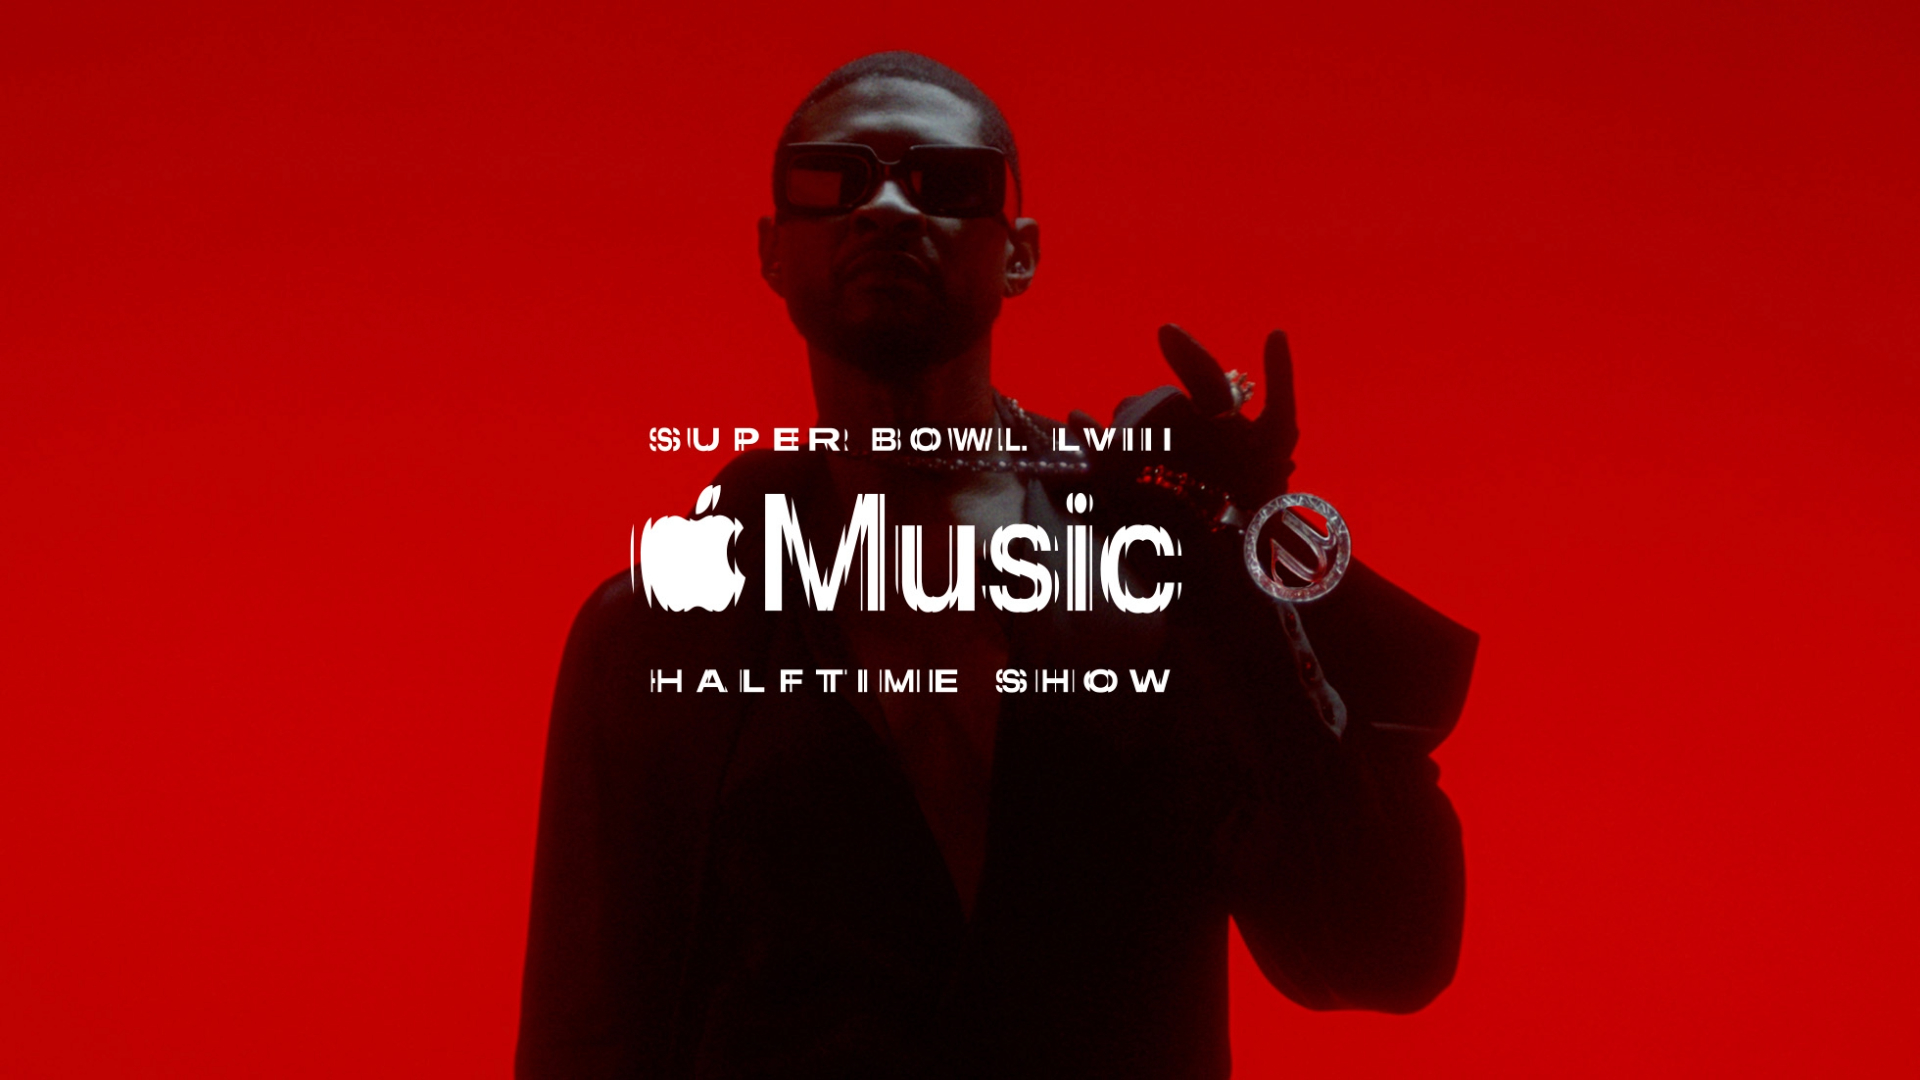 Usher teams up with Apple Music for a preview of his Super